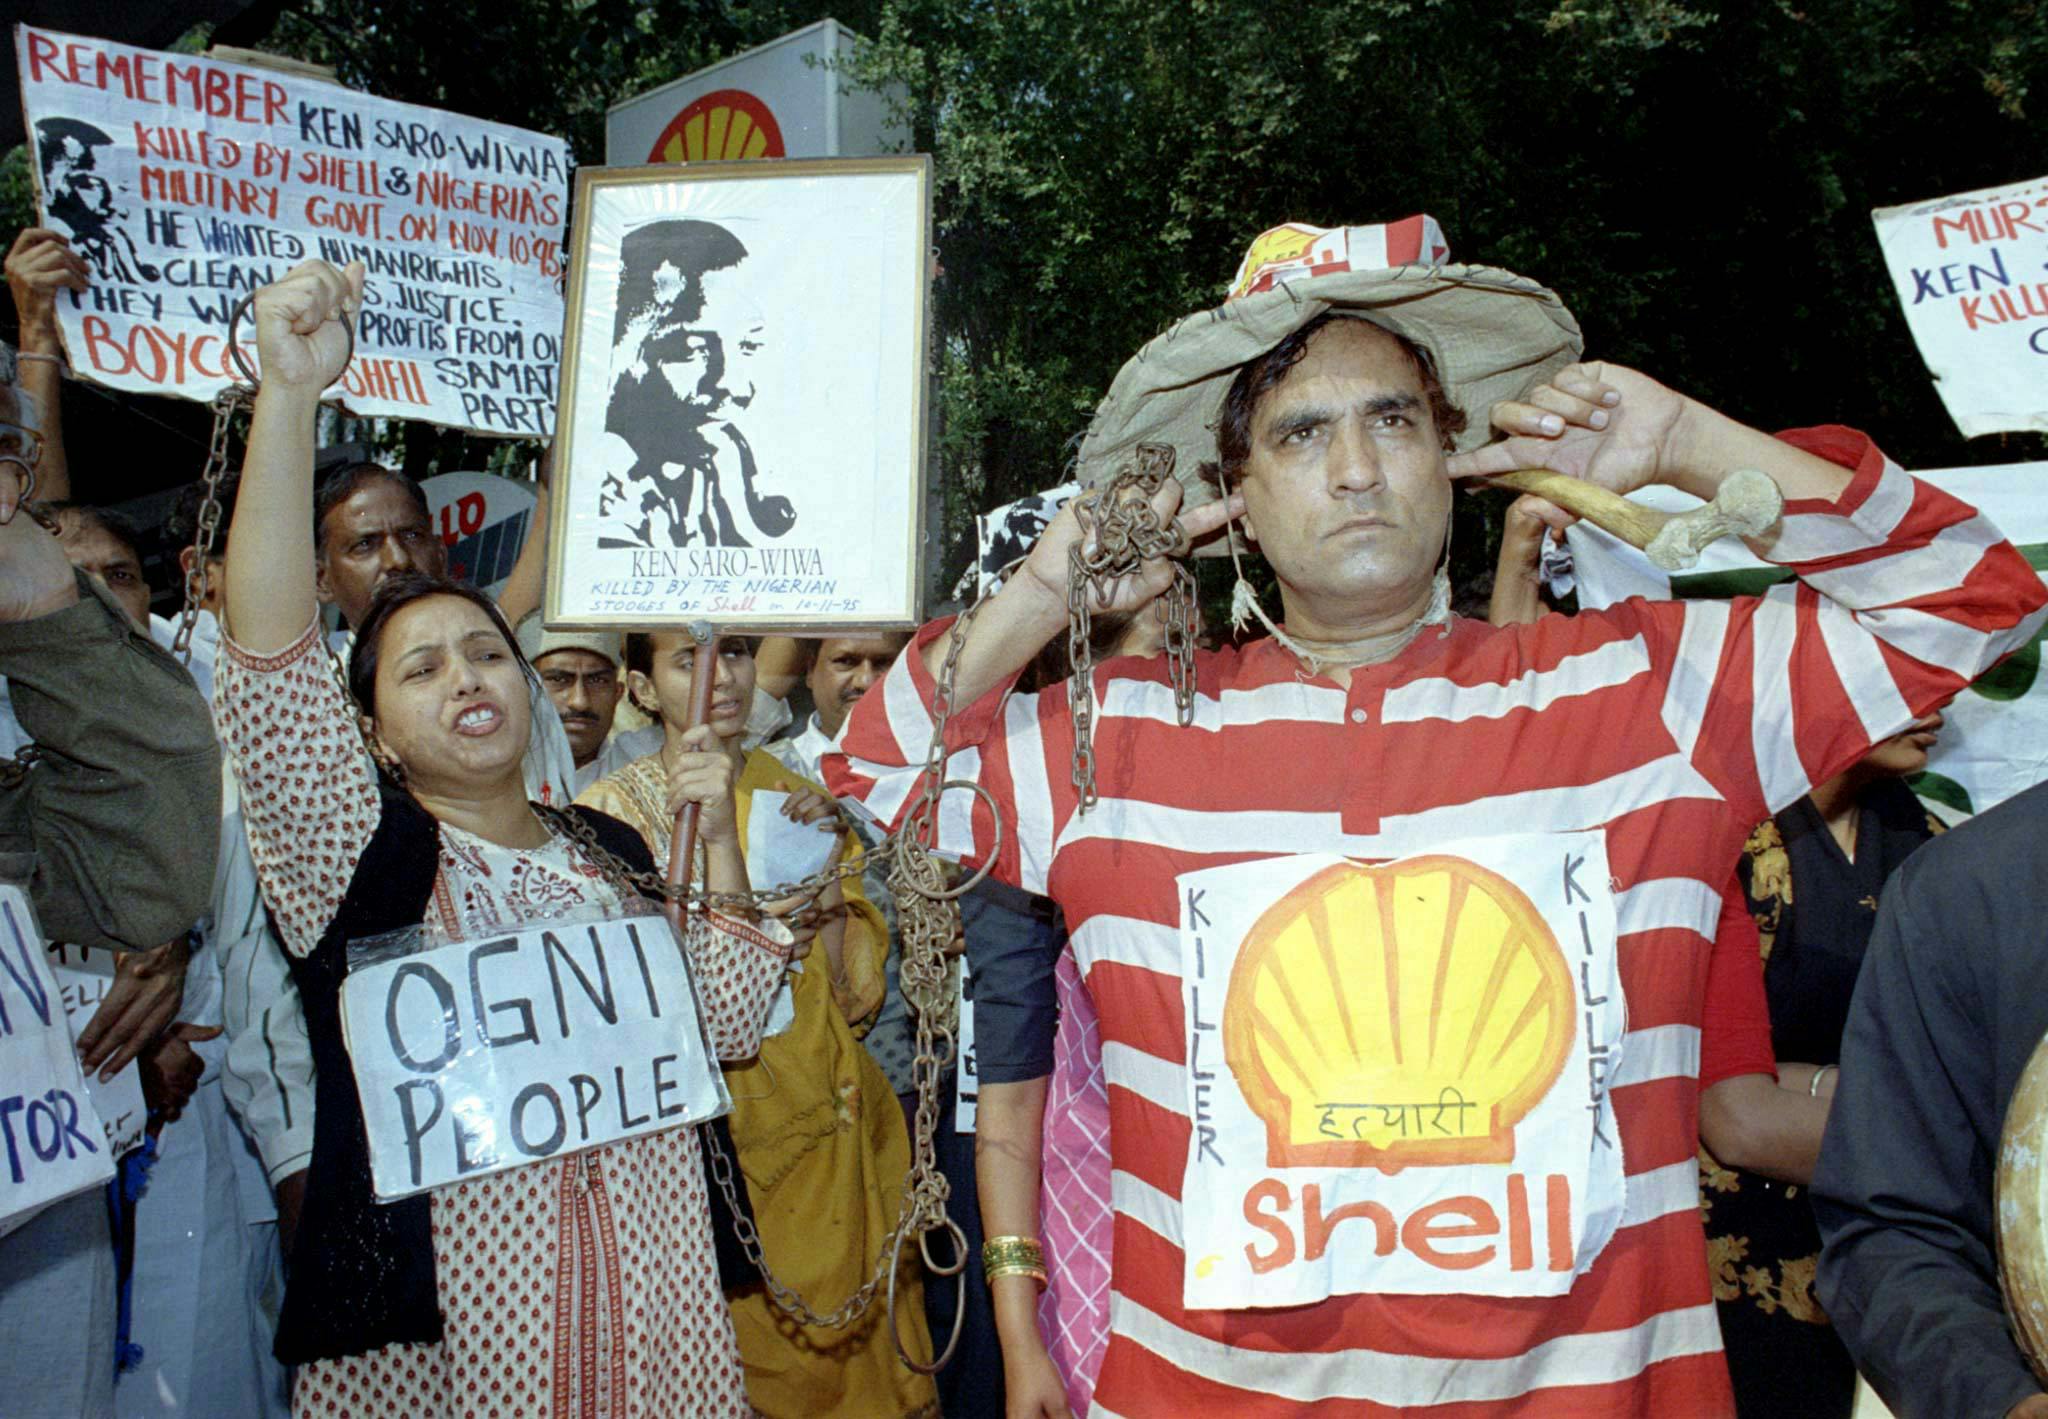 ACTIVISTS RAISE SLOGANS IN NEW DELHI
Activists chant slogans against the Anglo-Dutch oil firm Royal/Dutch Shell in New Delhi November 10 during a protest march to commemorate the second anniversary of the death of Nigerian environmental campaigner Ken Saro-wiwa. The activist, who was leading a protest against Shell, was hanged along with eight of his Ogoni tribe activists by Nigeria's military police on November 10, 1995. The activists accuse Shell of not helping villagers near its oilfields and say it should have put pressure on the governnment to stop their execution. INDIA NETHERLANDS